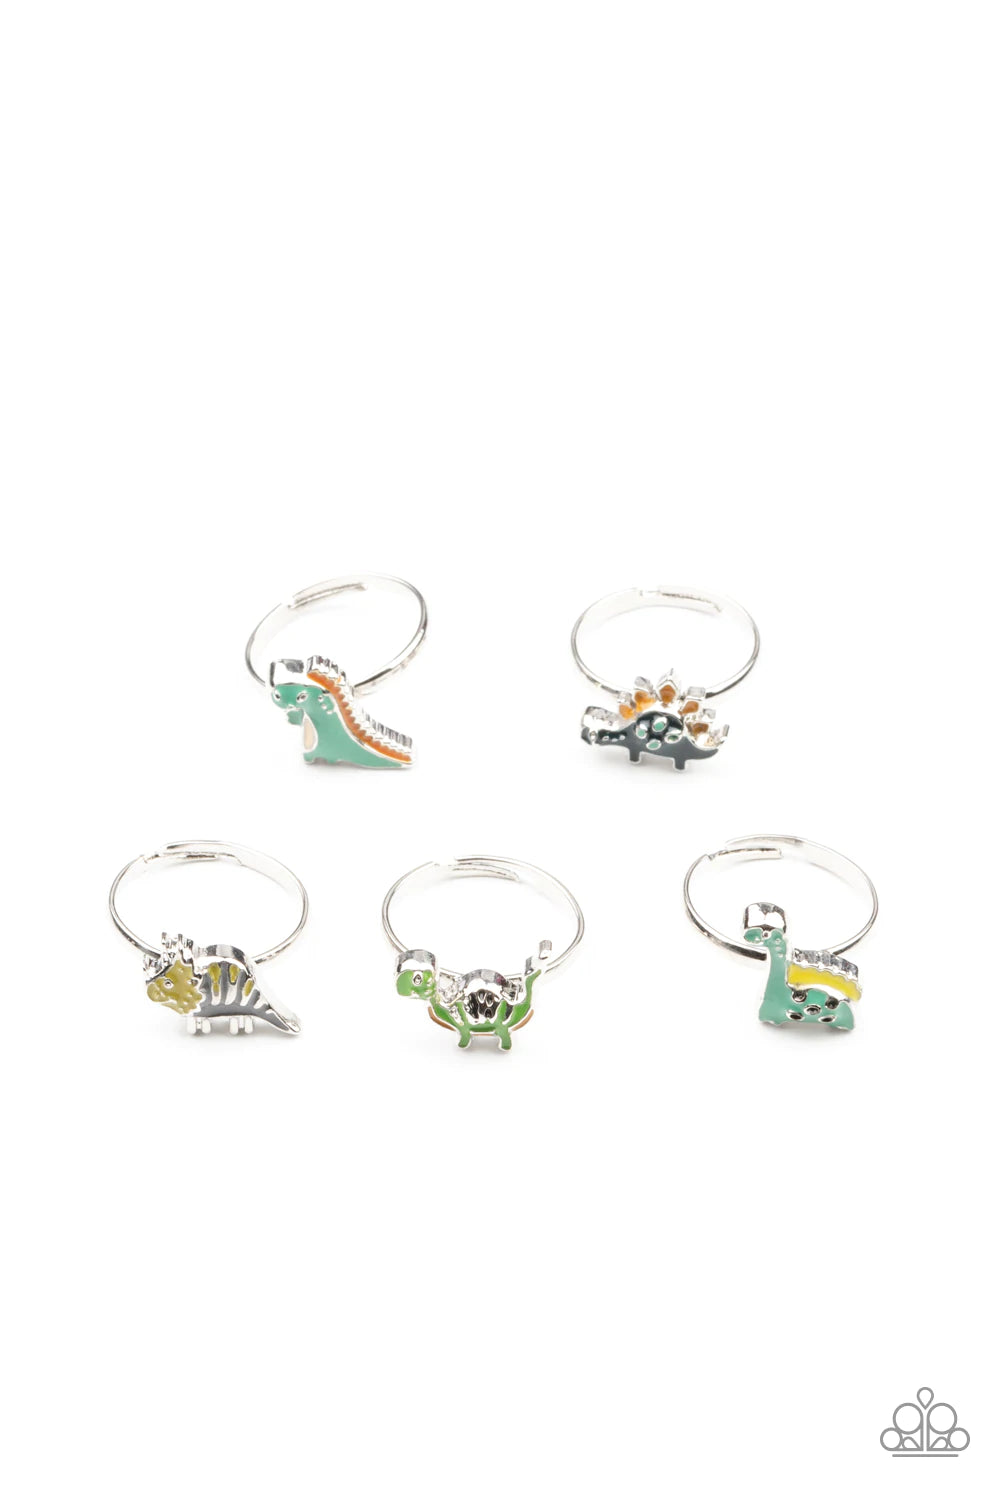 Paparazzi Accessories Starlet Shimmer Rings: #2 The prehistoric world is at your fingertips. Features colorfully painted dinosaurs, including stegosaurus, brontosaurus, and more. Jewelry